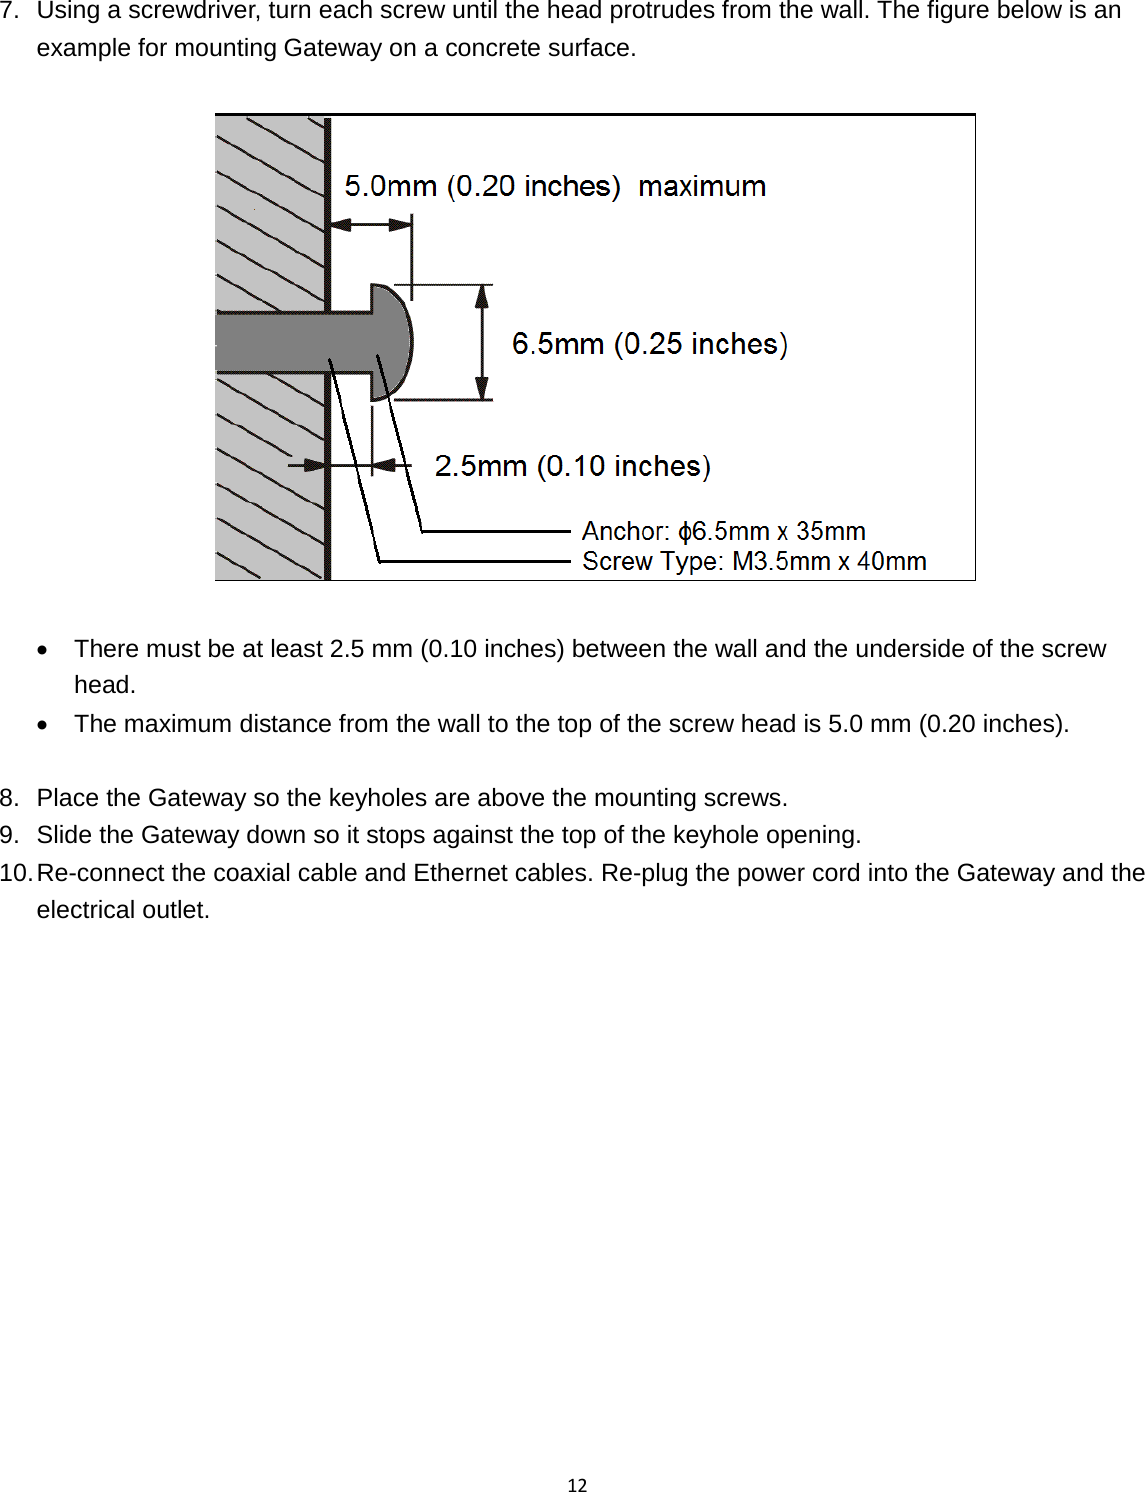 12  7. Using a screwdriver, turn each screw until the head protrudes from the wall. The figure below is an example for mounting Gateway on a concrete surface.    • There must be at least 2.5 mm (0.10 inches) between the wall and the underside of the screw head. • The maximum distance from the wall to the top of the screw head is 5.0 mm (0.20 inches).  8. Place the Gateway so the keyholes are above the mounting screws. 9. Slide the Gateway down so it stops against the top of the keyhole opening. 10. Re-connect the coaxial cable and Ethernet cables. Re-plug the power cord into the Gateway and the electrical outlet.  